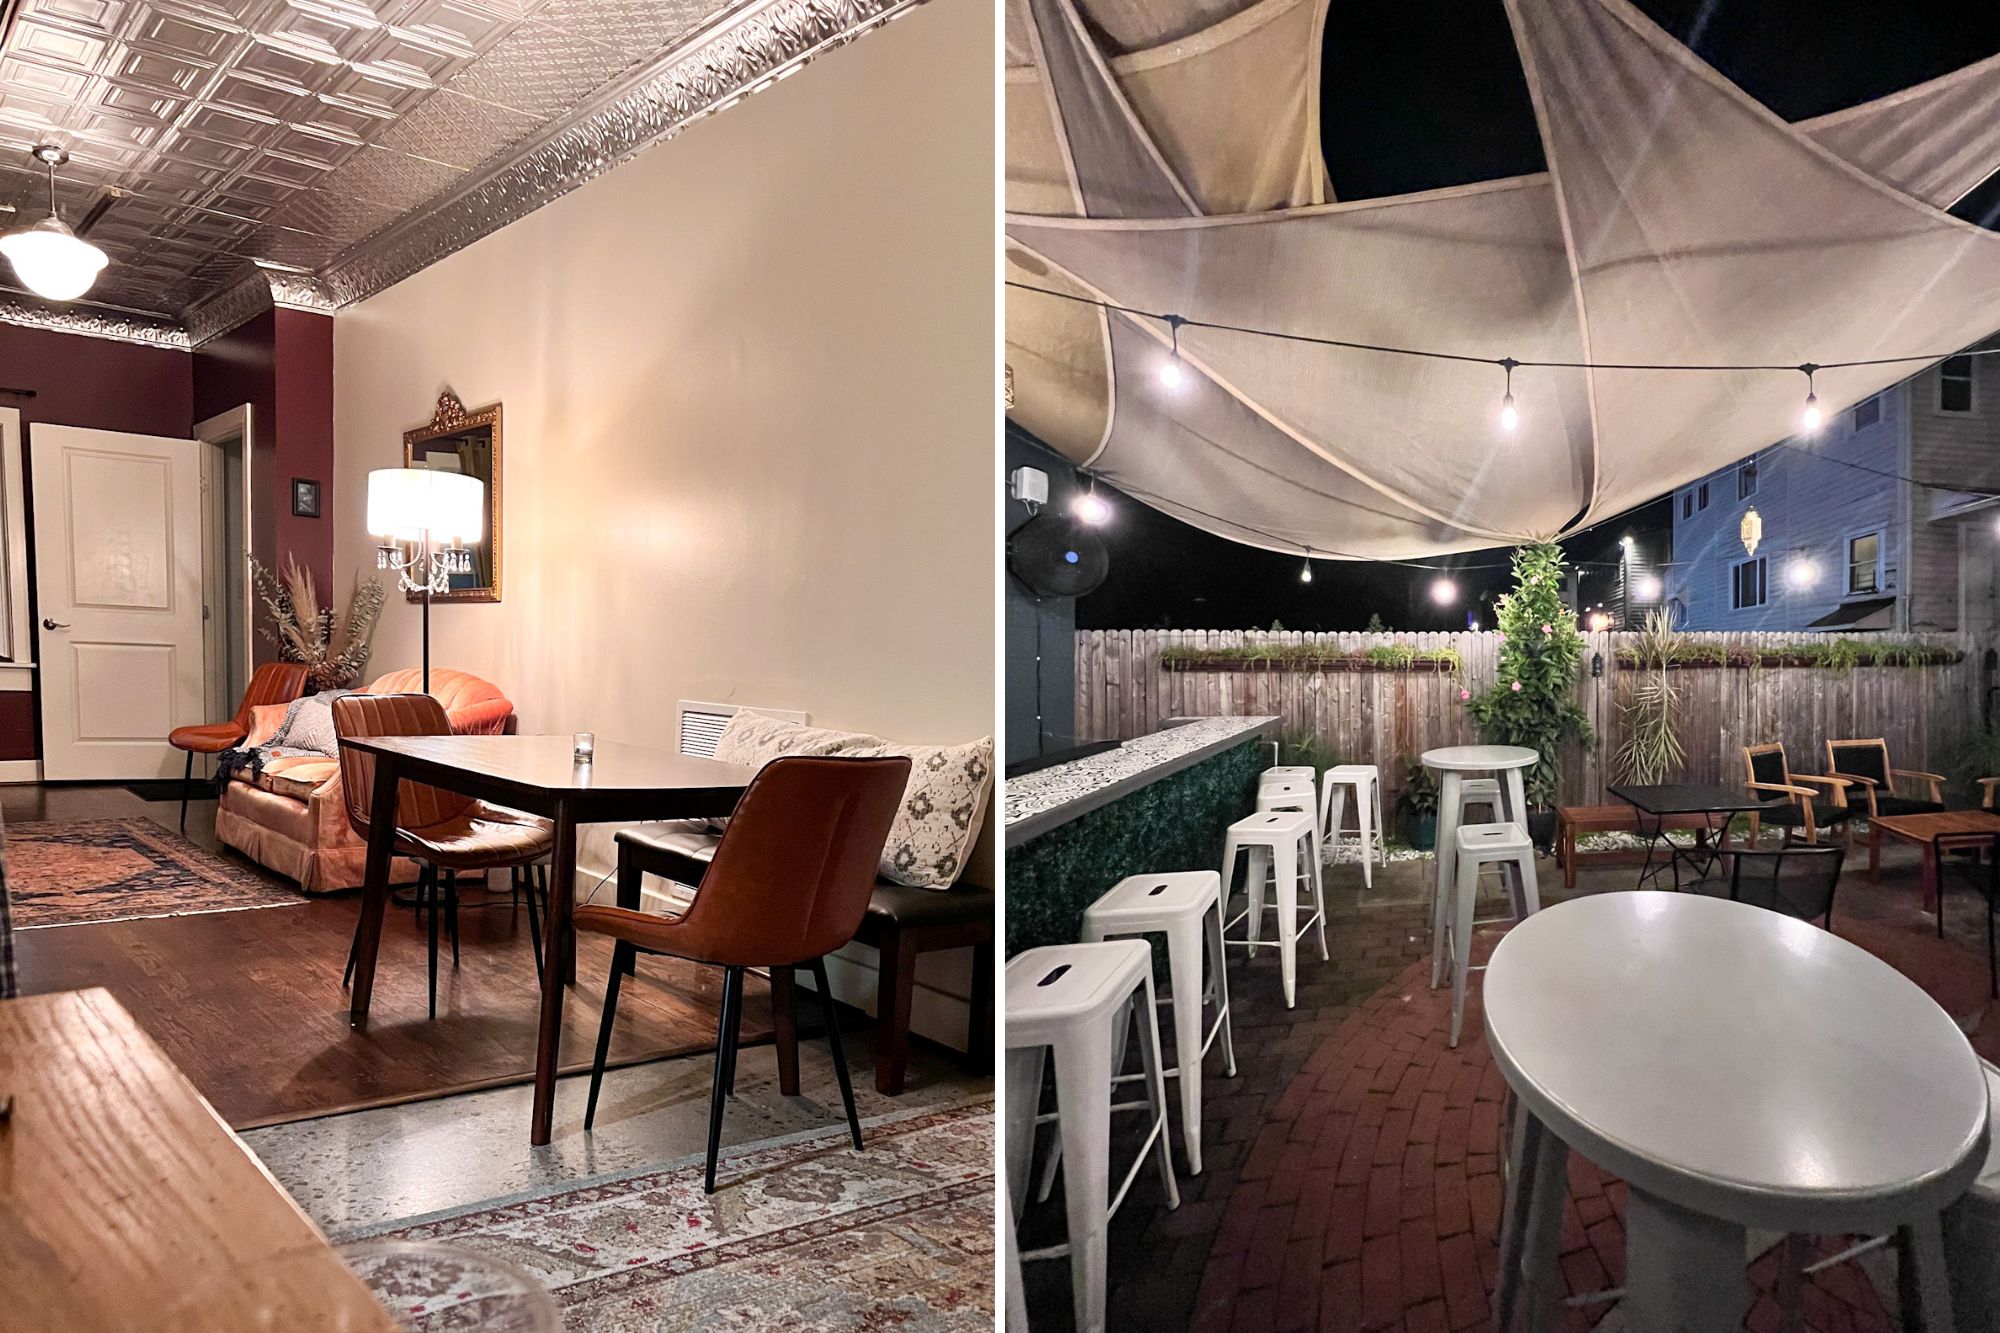 bloom's lounge and outdoor patio